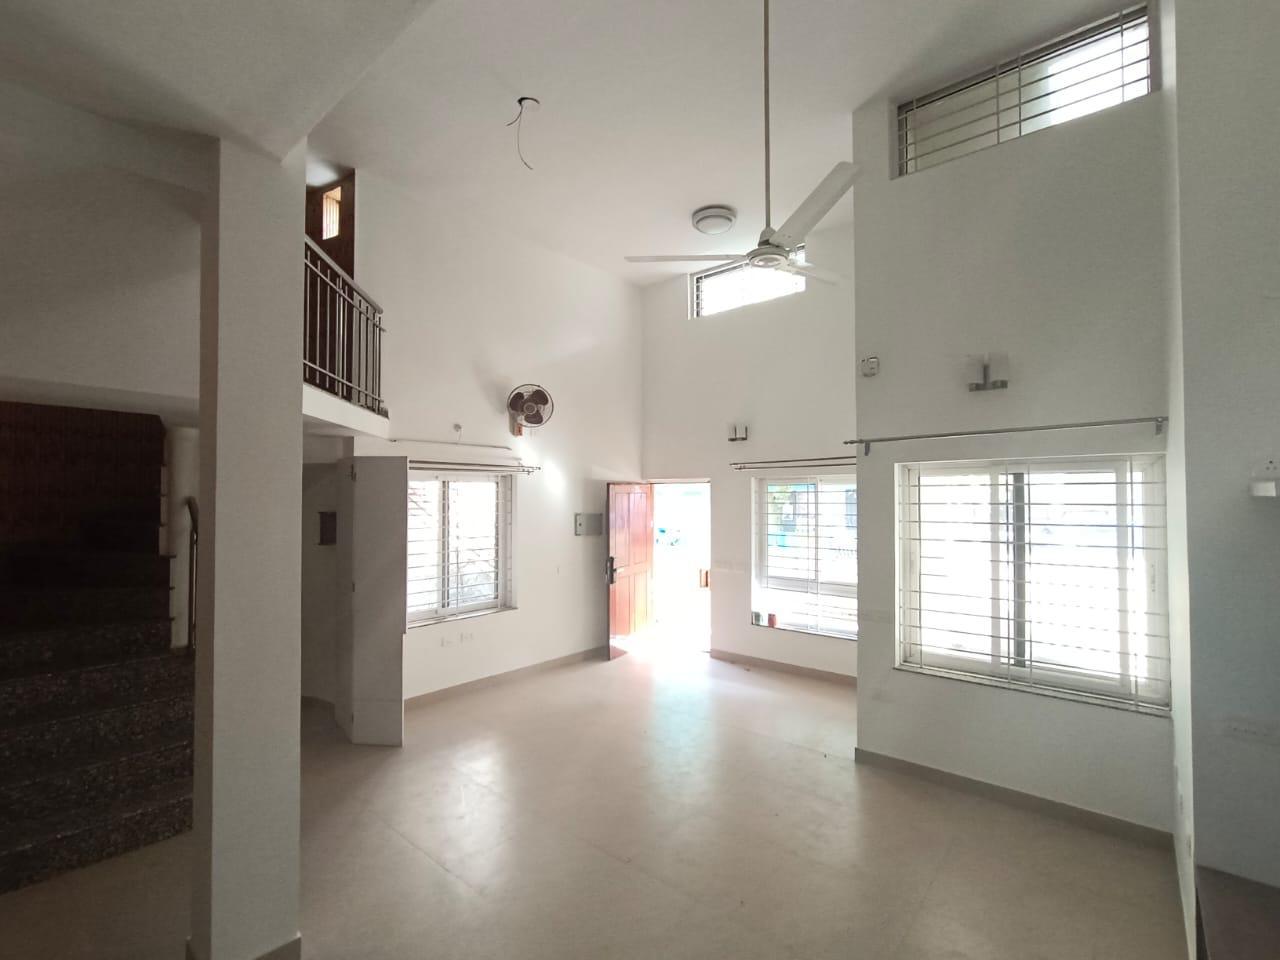 2 BHK Independent House for Lease Only at JAM-6127 in Rajarajeshwari Nagar